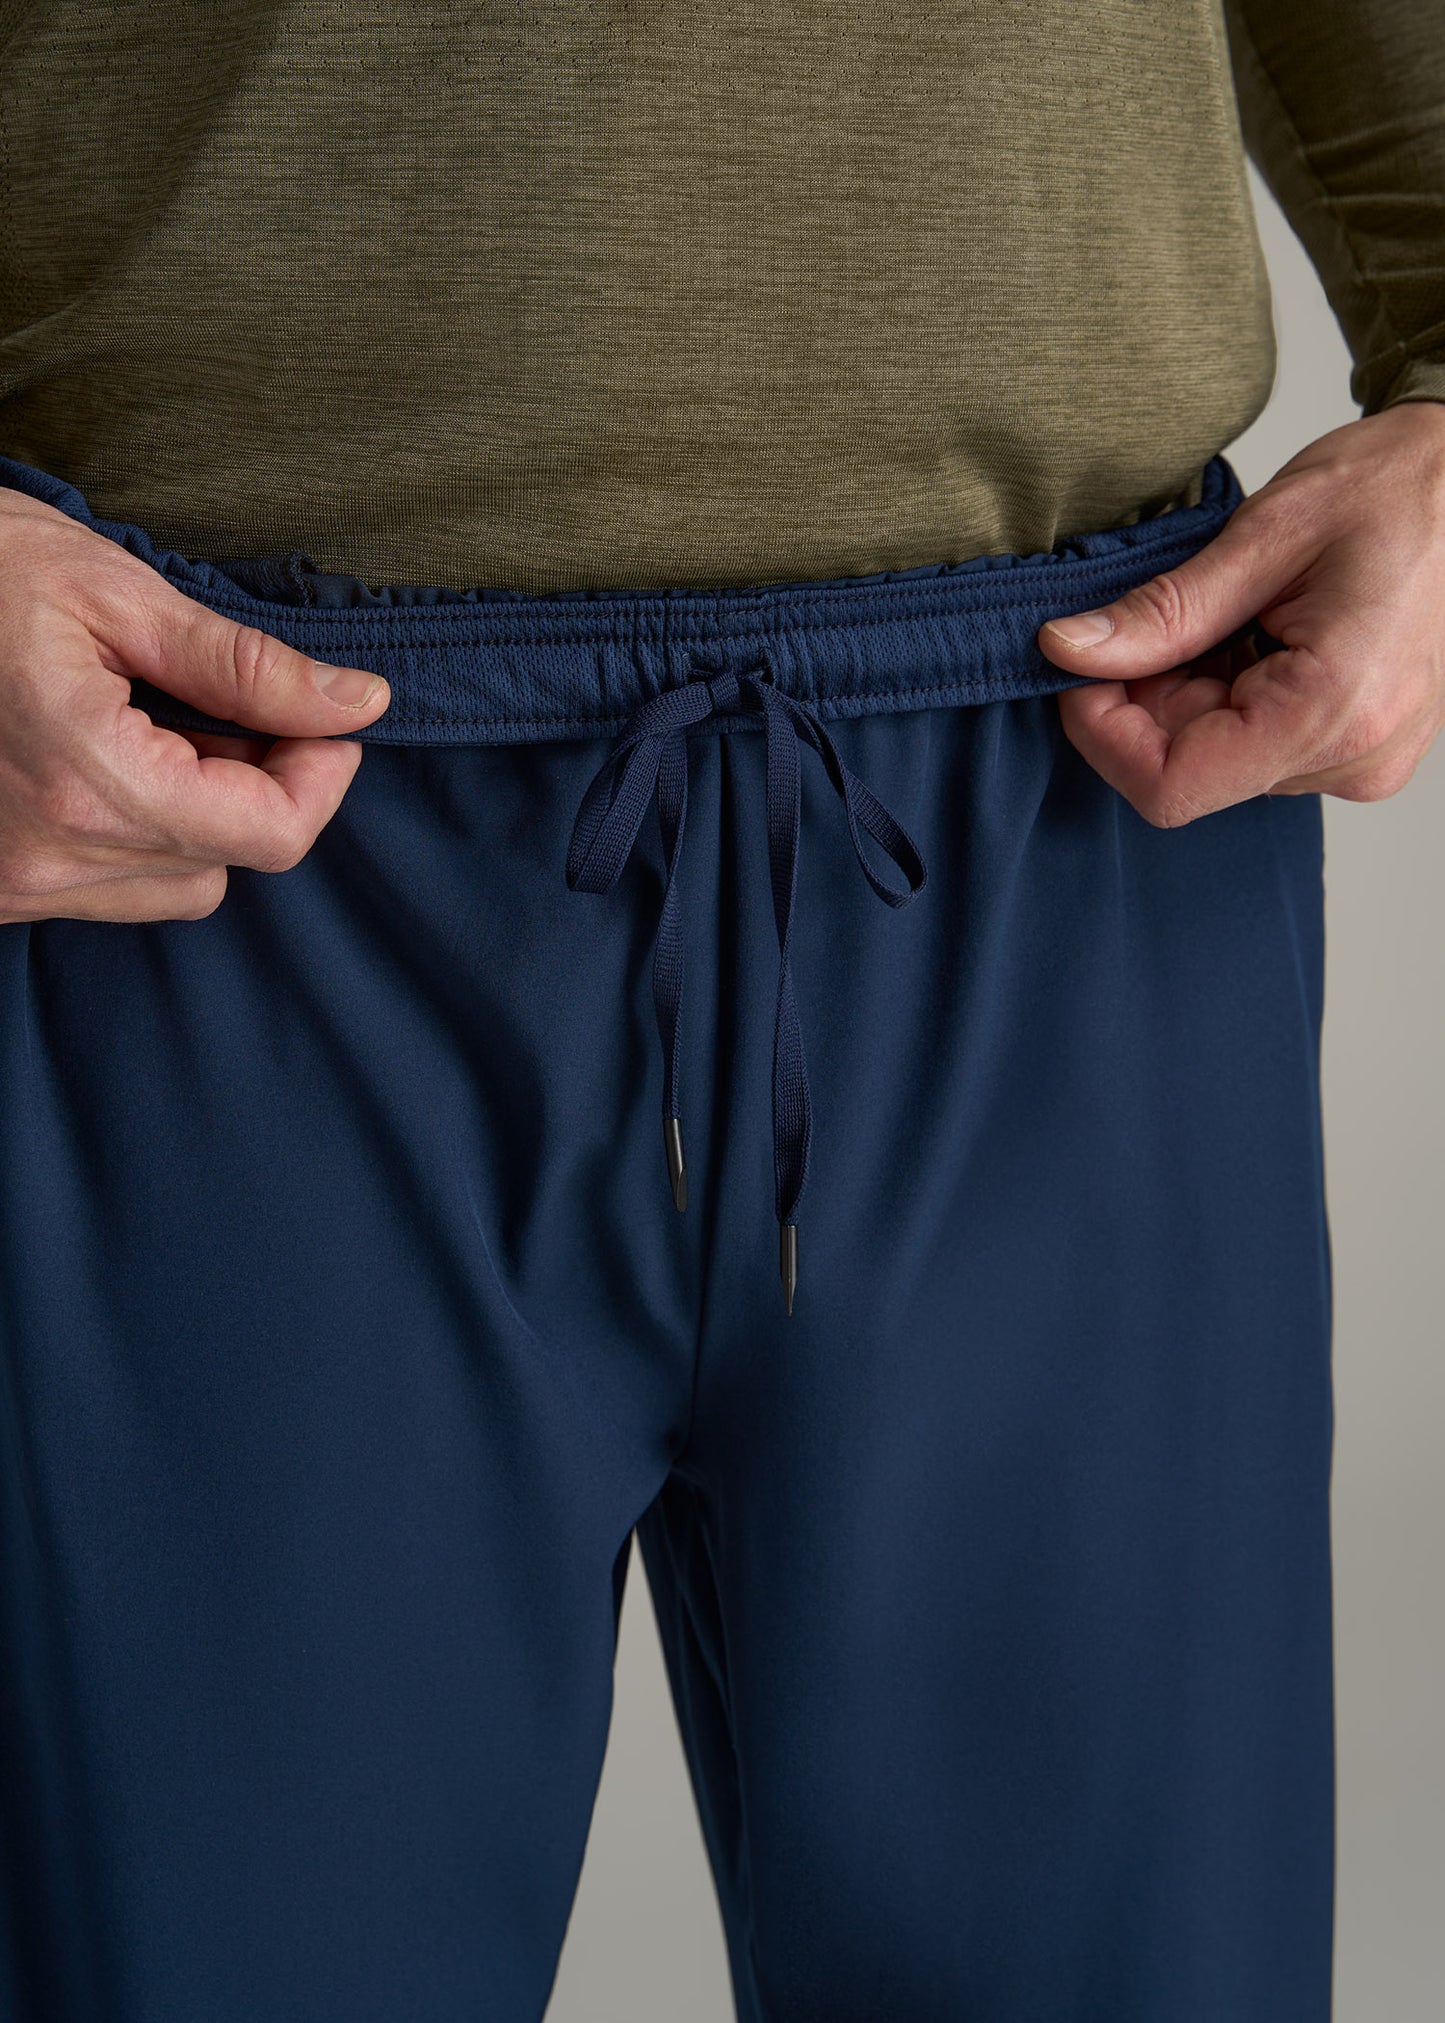 RELAXED FIT Lightweight Athletic Pants for Tall Men in Navy